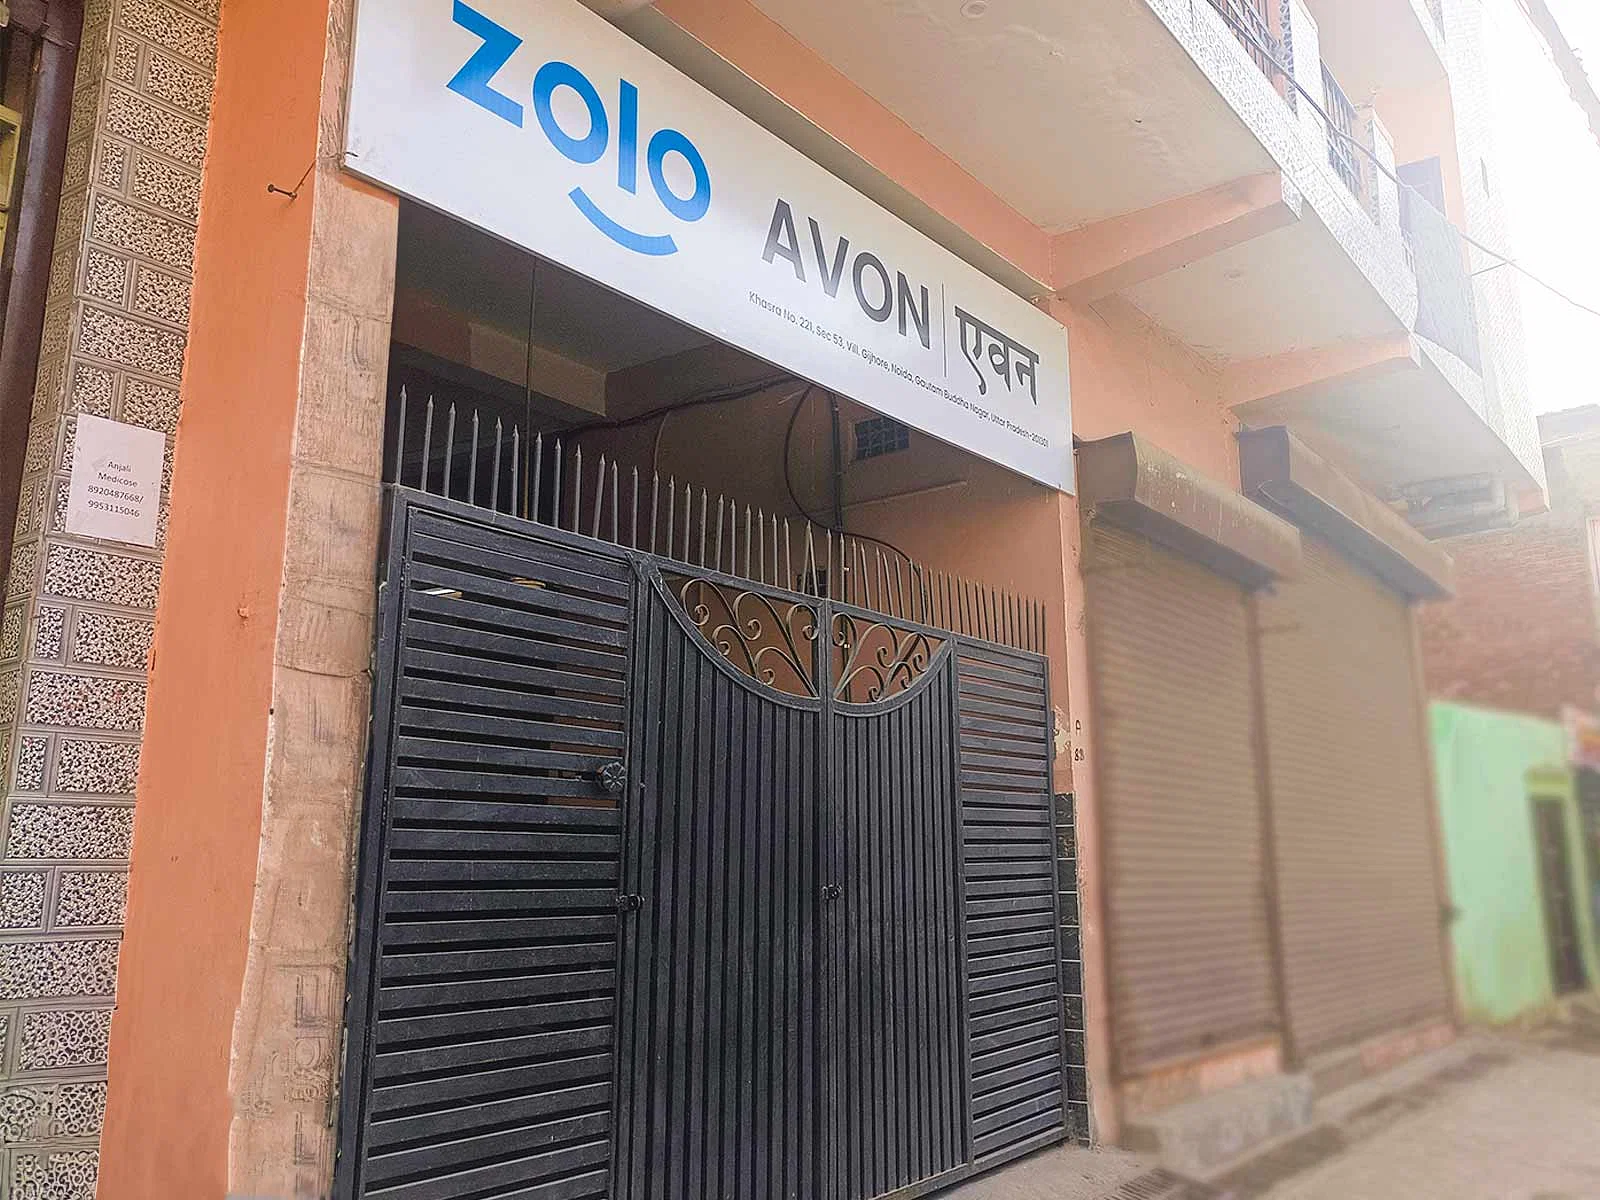 safe and affordable hostels for unisex students with 24/7 security and CCTV surveillance-Zolo Avon